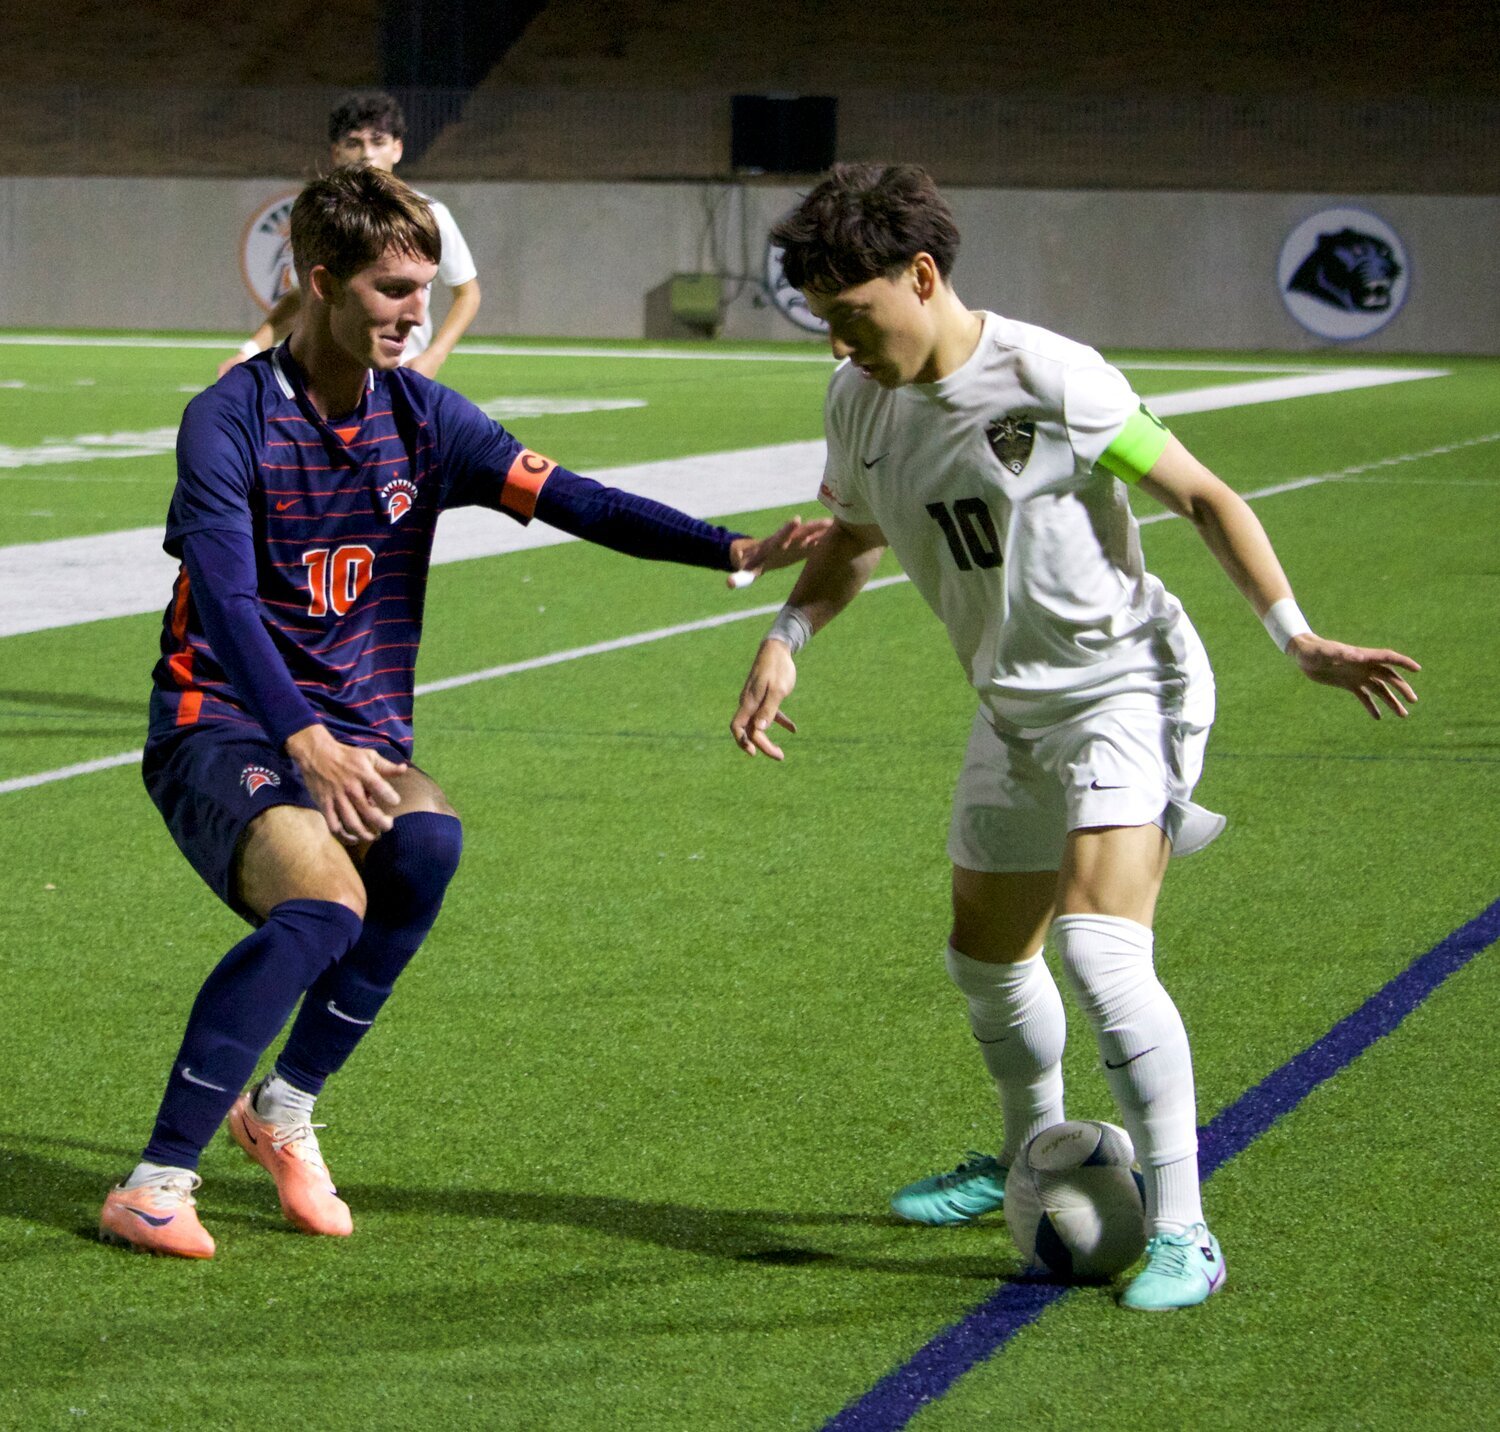 Marcelo Ojeda tries to get past Aidan Morrison during Friday’s game between Seven Lakes and Jordan at Legacy Stadium.